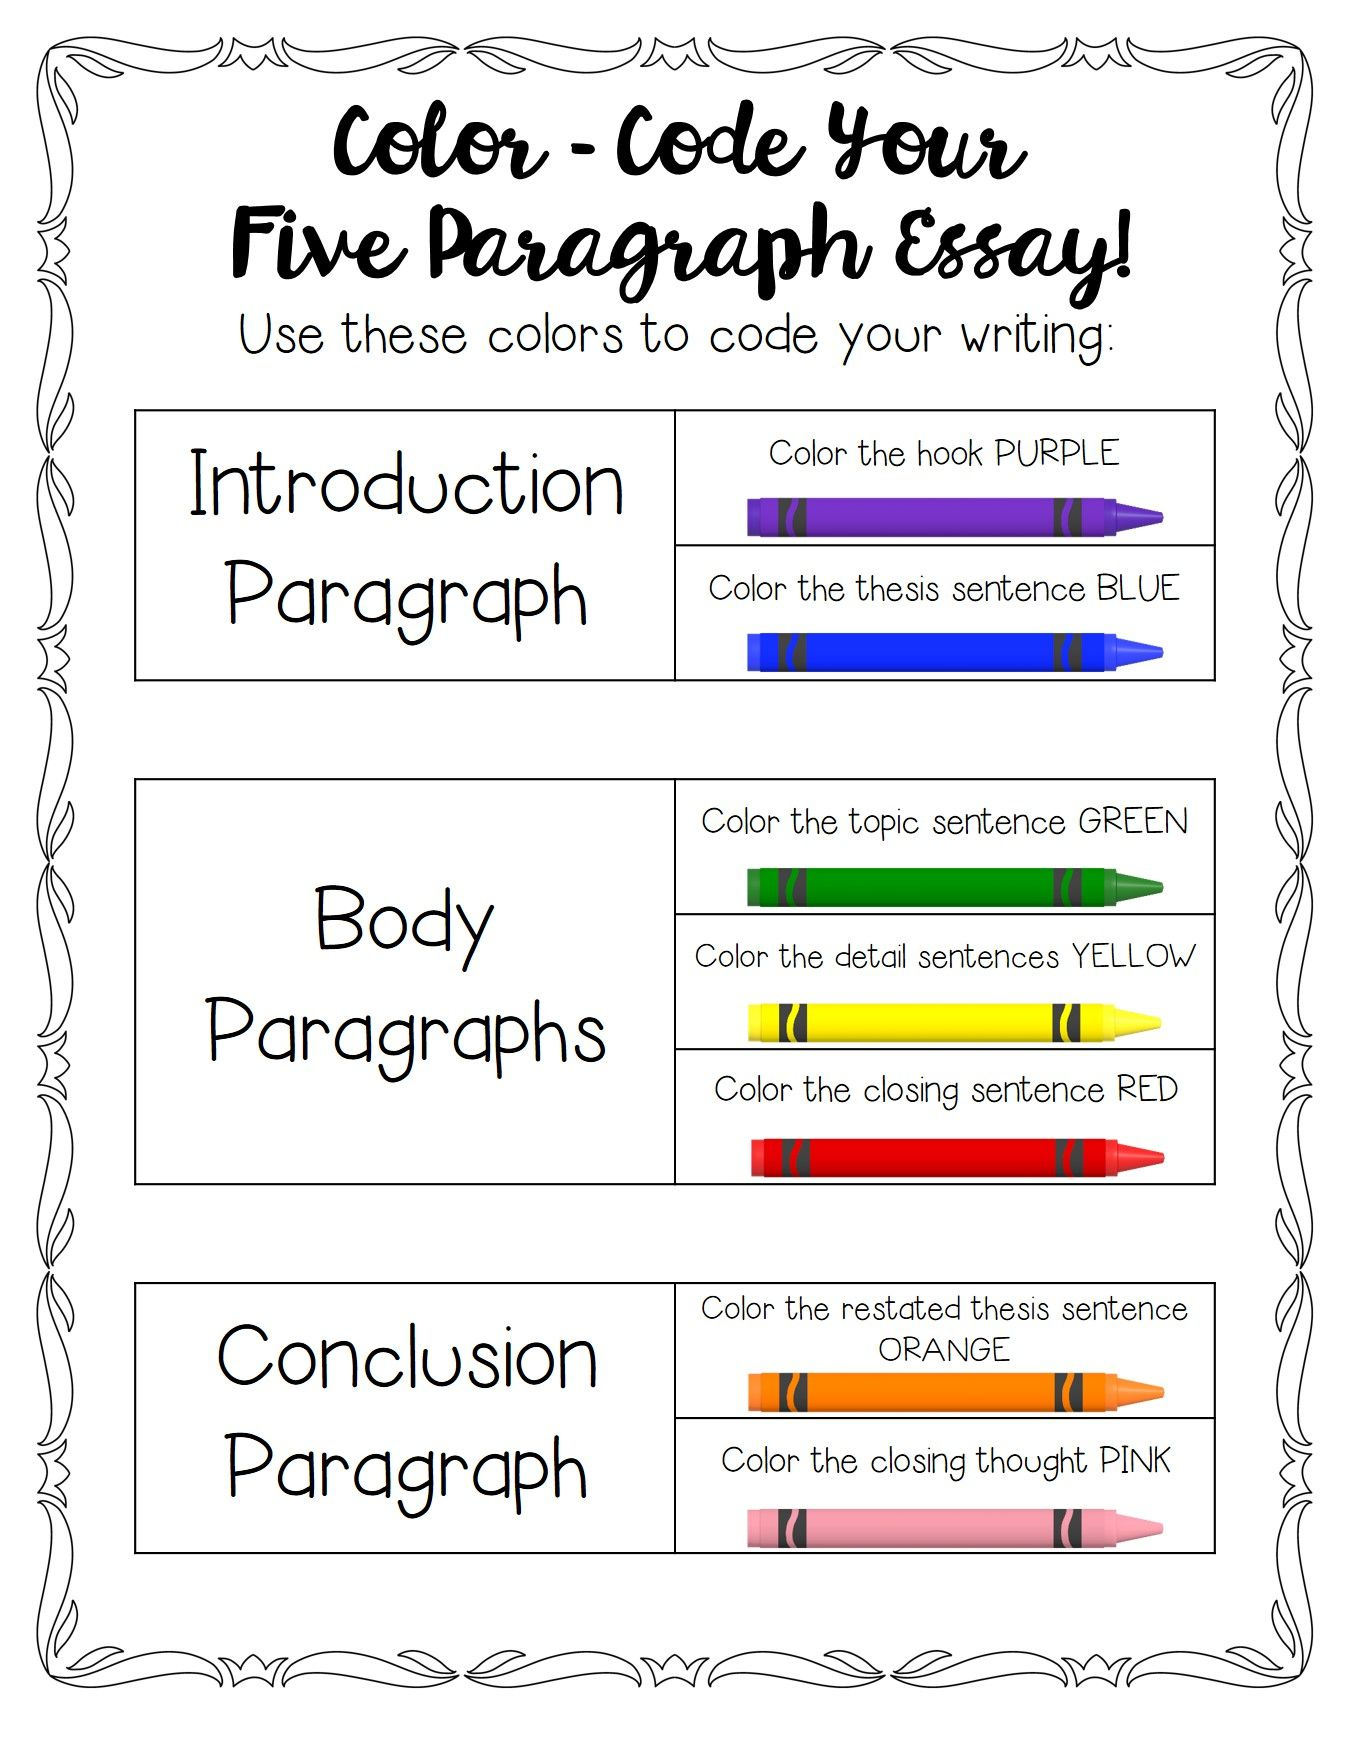 Tips For Teaching &amp;amp; Grading Five Paragraph Essays | Writing